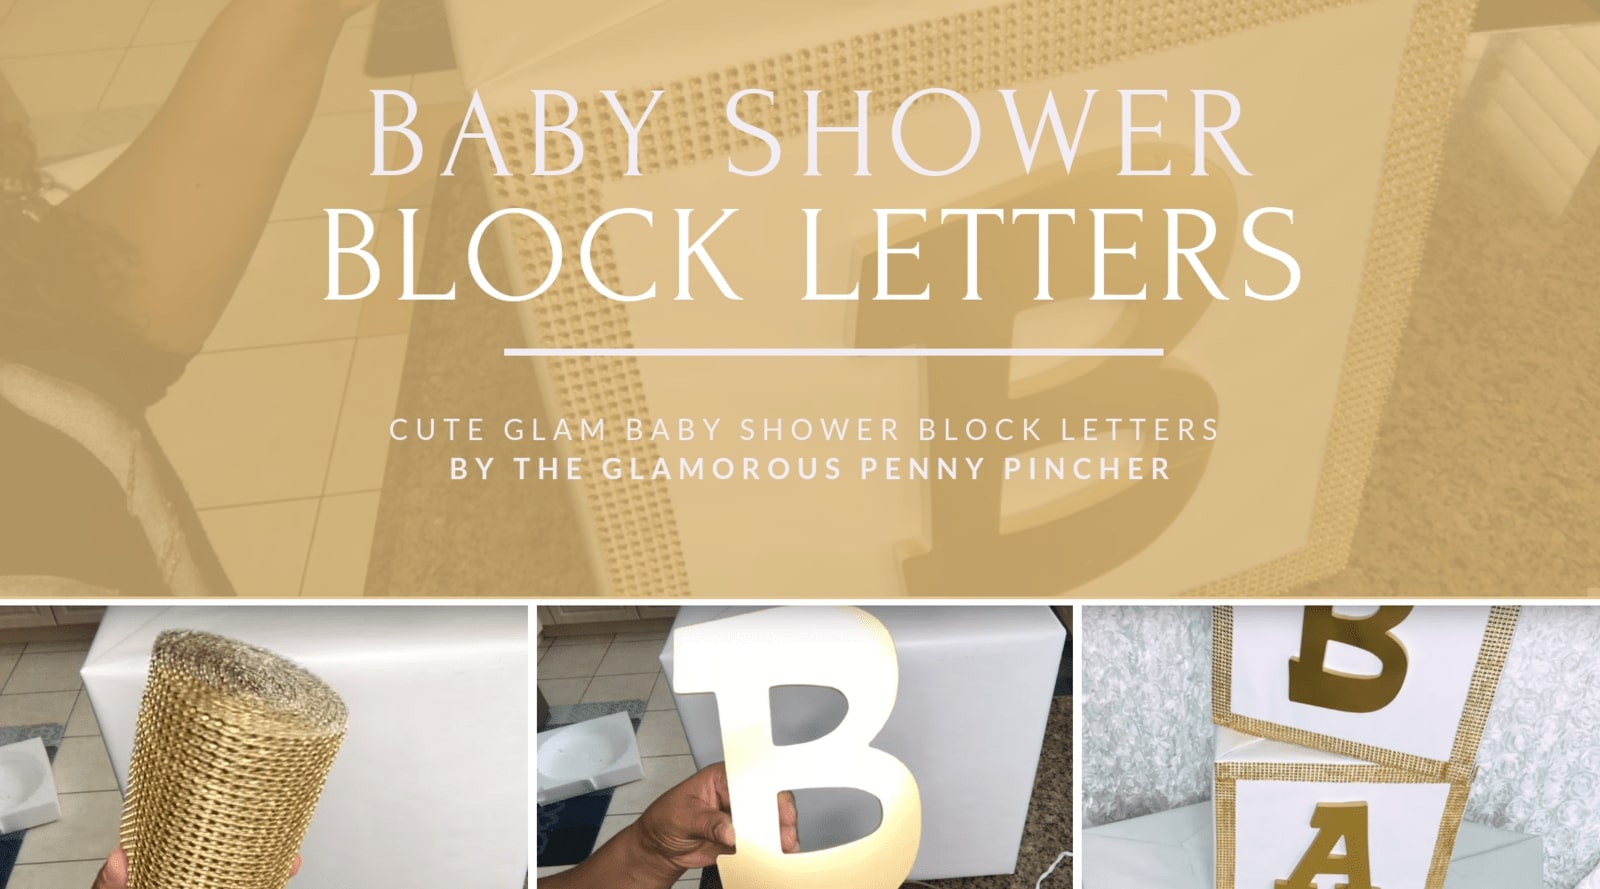 Baby Shower Block Letters by The Glamorous Penny Pincher